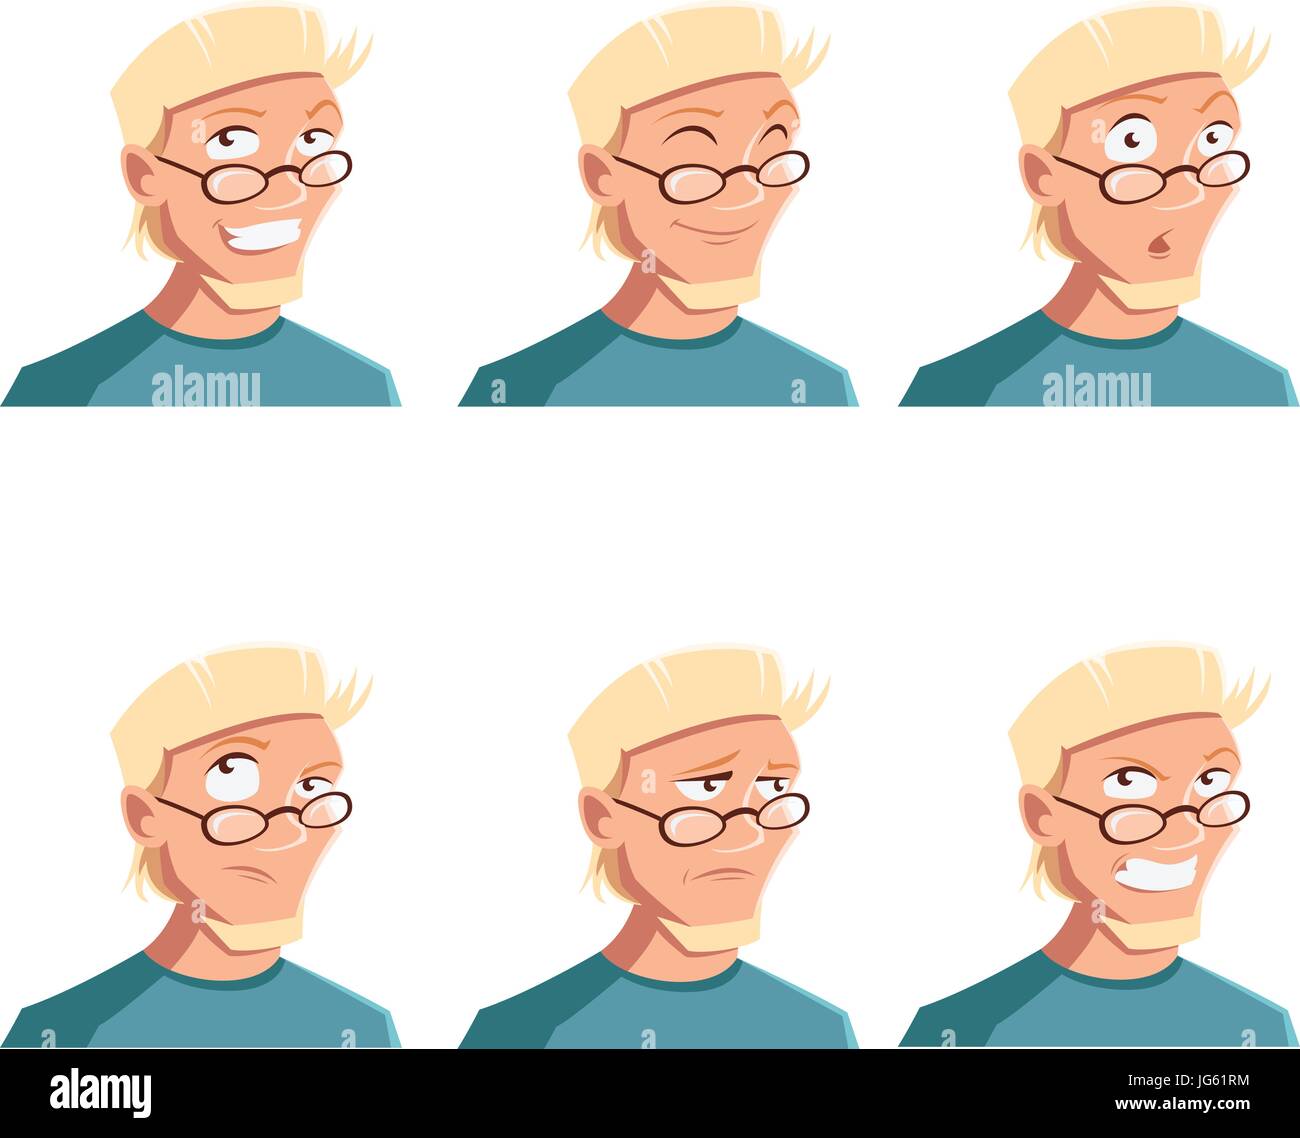 Set of man face icons Stock Vector